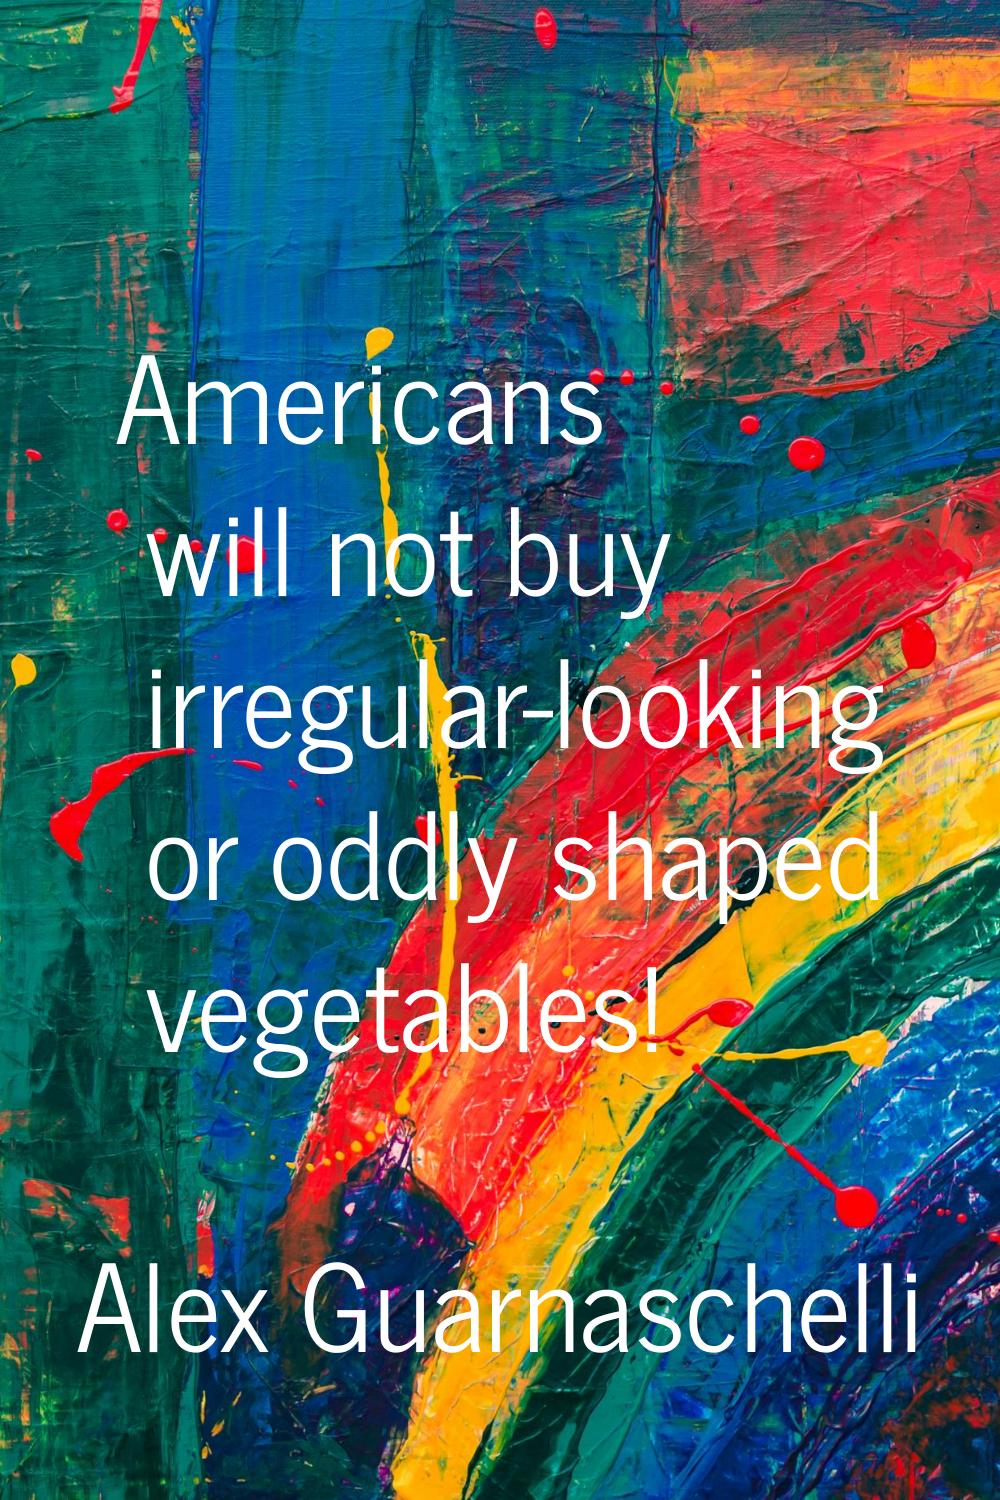 Americans will not buy irregular-looking or oddly shaped vegetables!